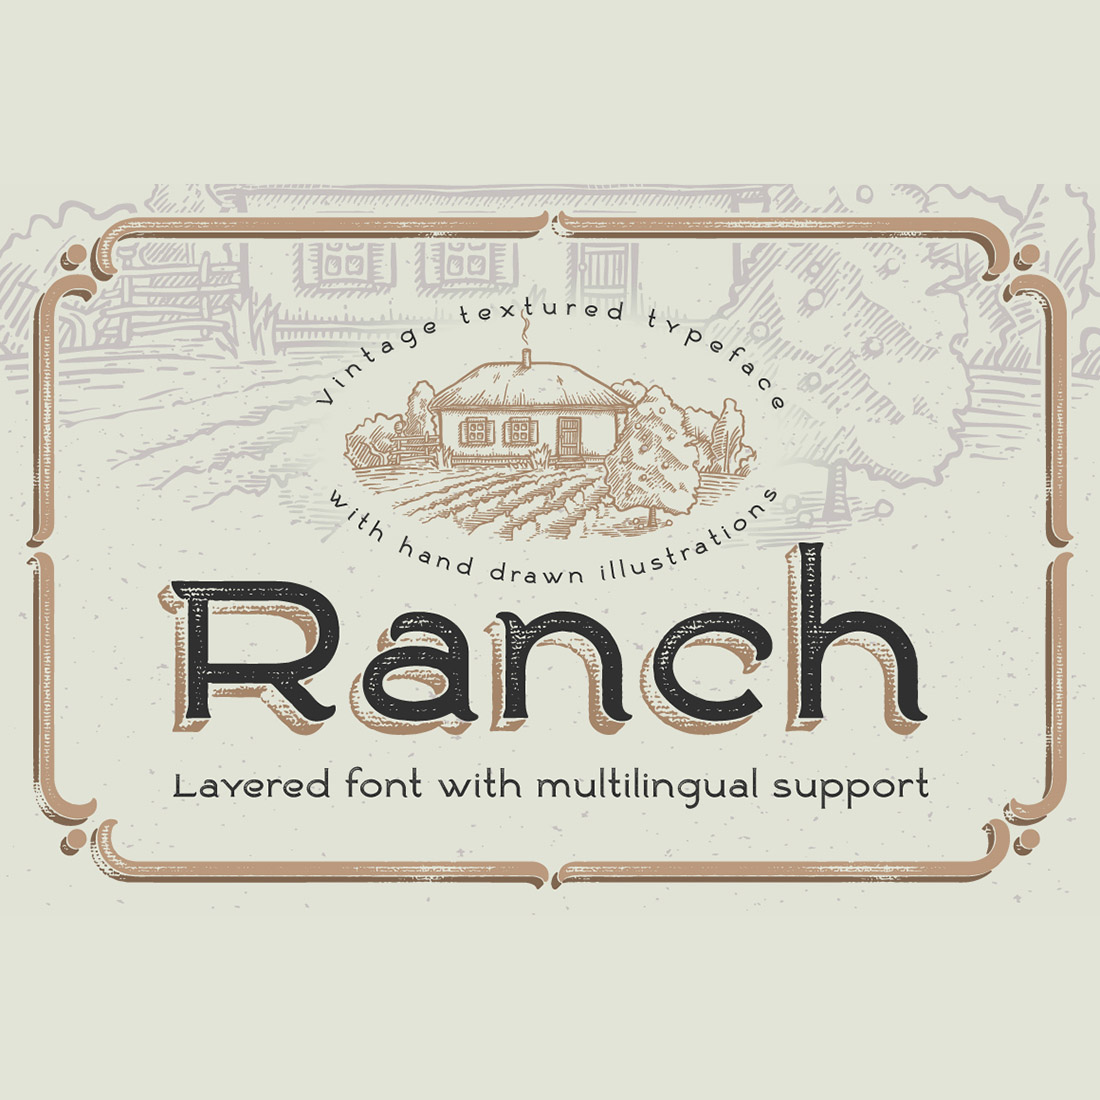 Ranch Vintage Typeface Font and Illustrations cover image.